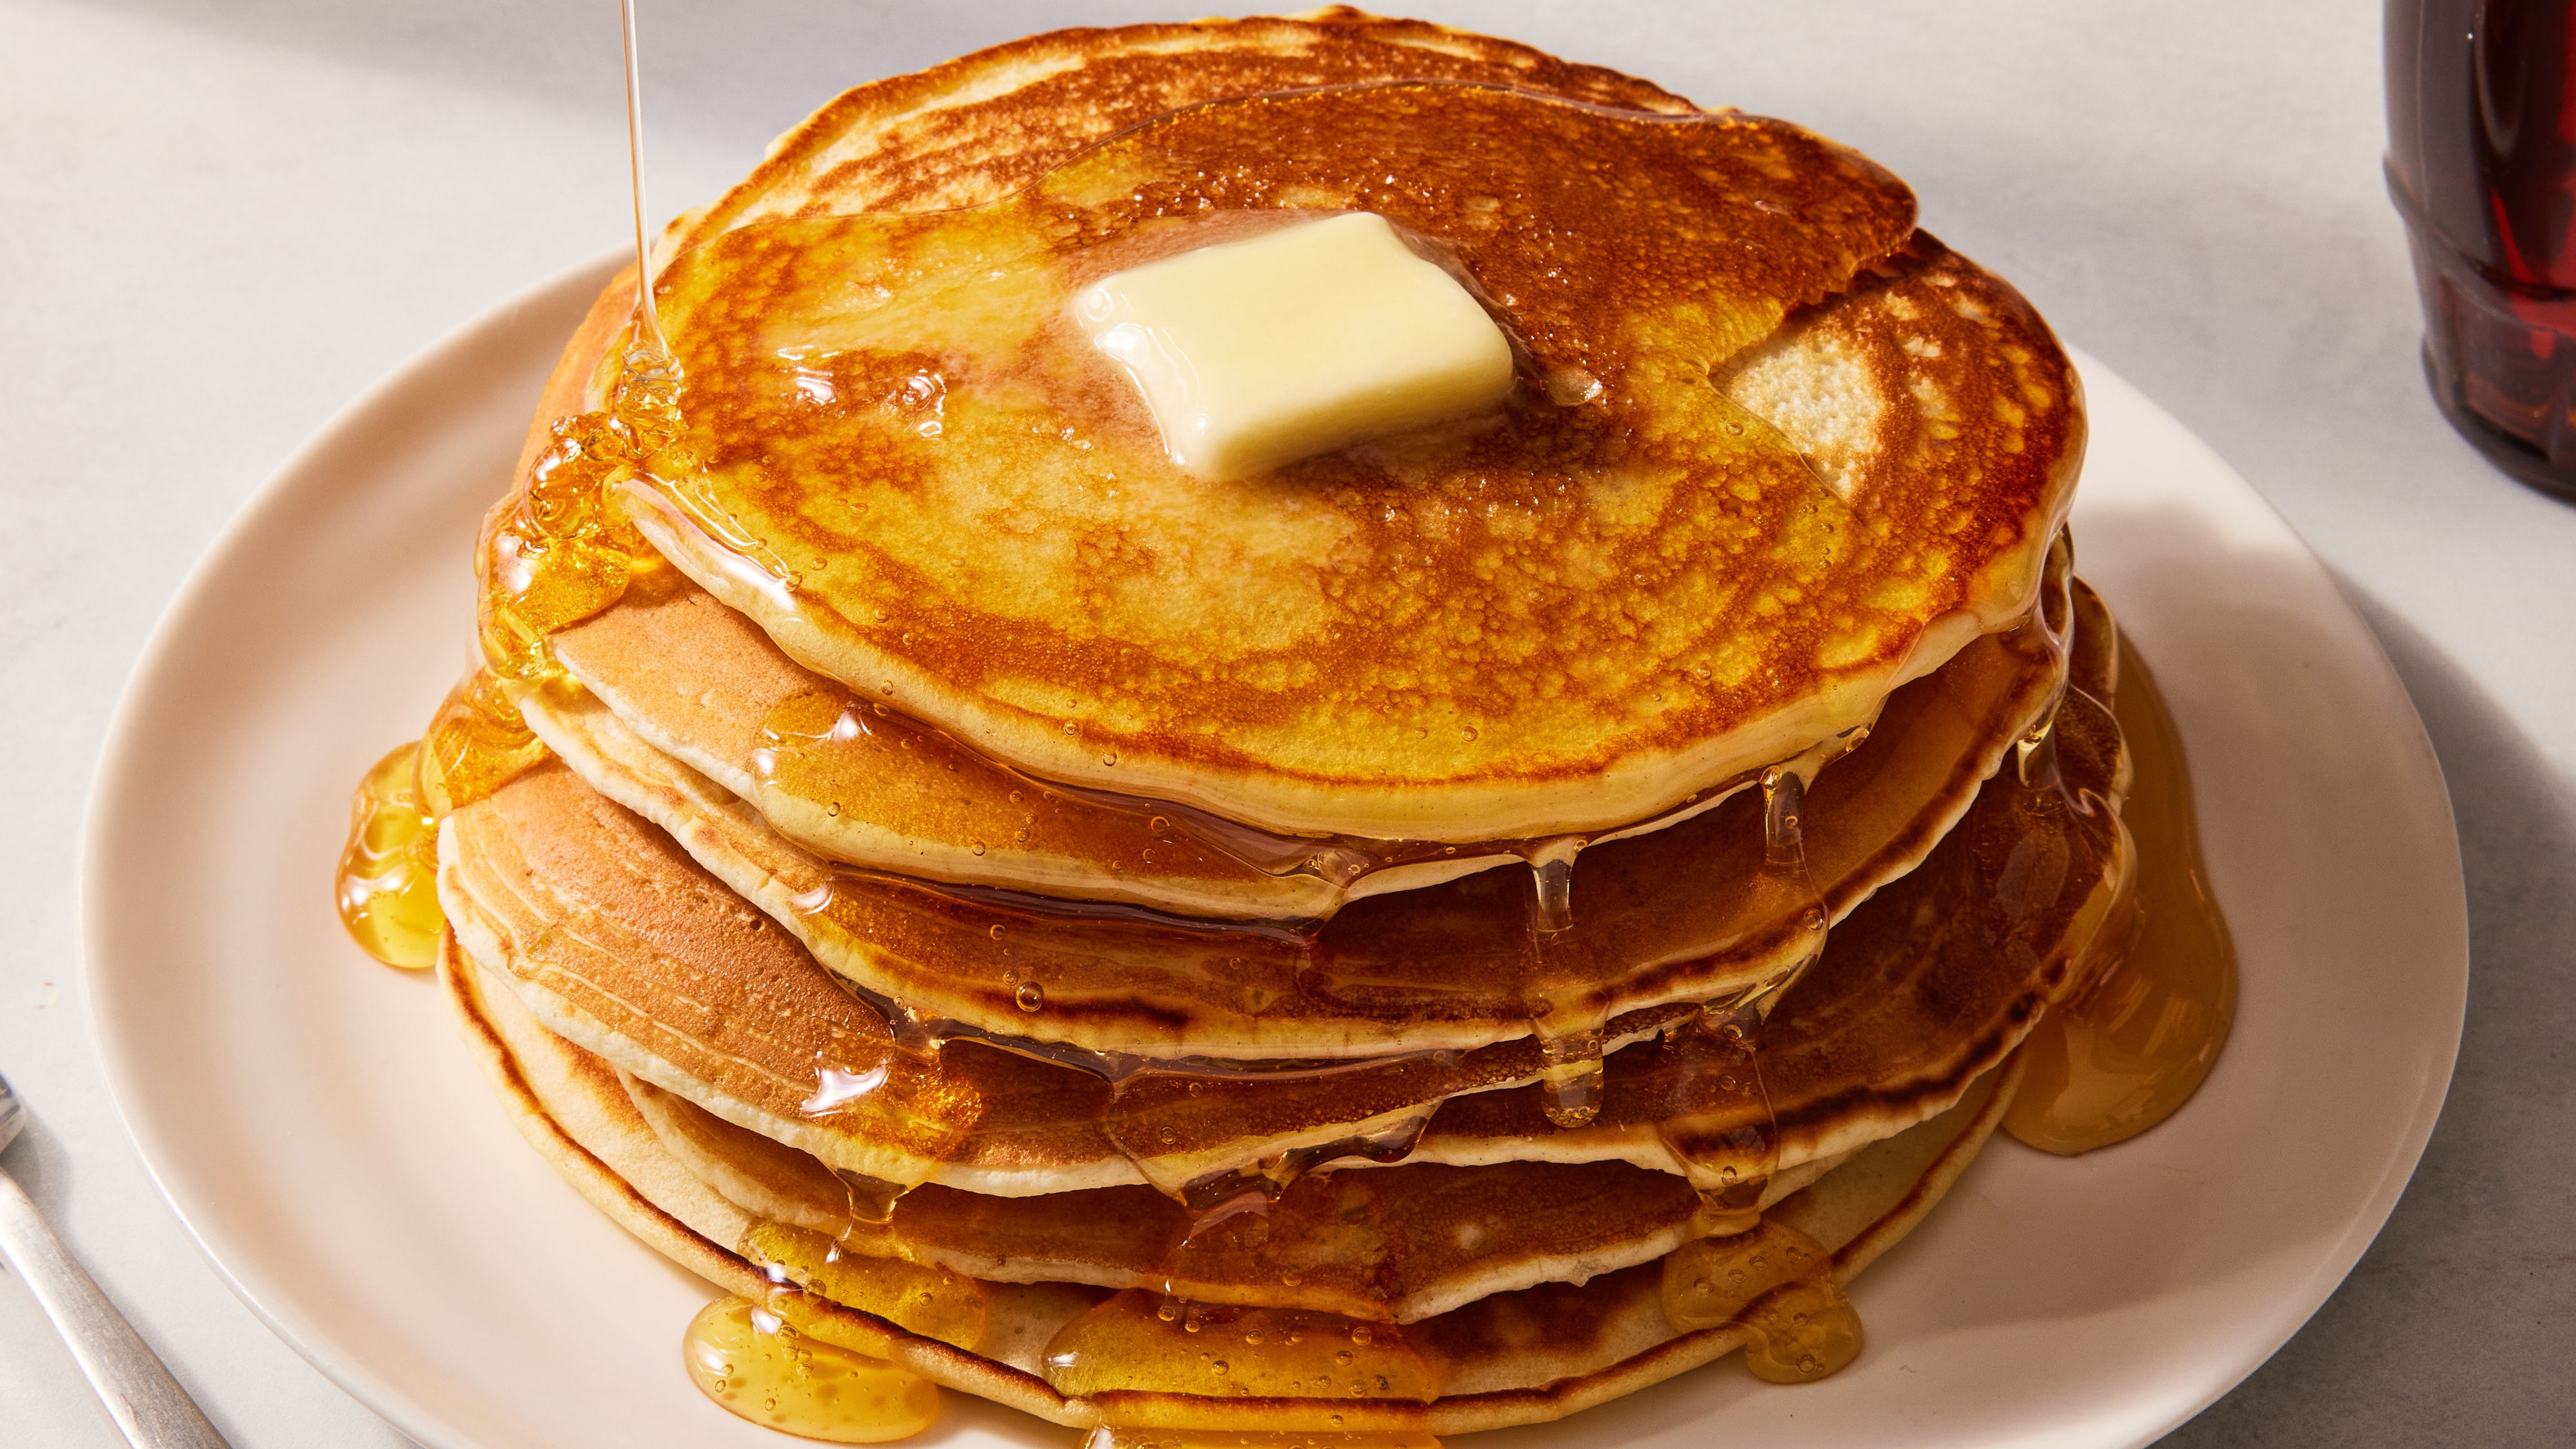 https://hips.hearstapps.com/hmg-prod/images/best-homemade-pancakes-index-640775a2dbad8.jpg?crop=0.889xw:1.00xh;0.0561xw,0